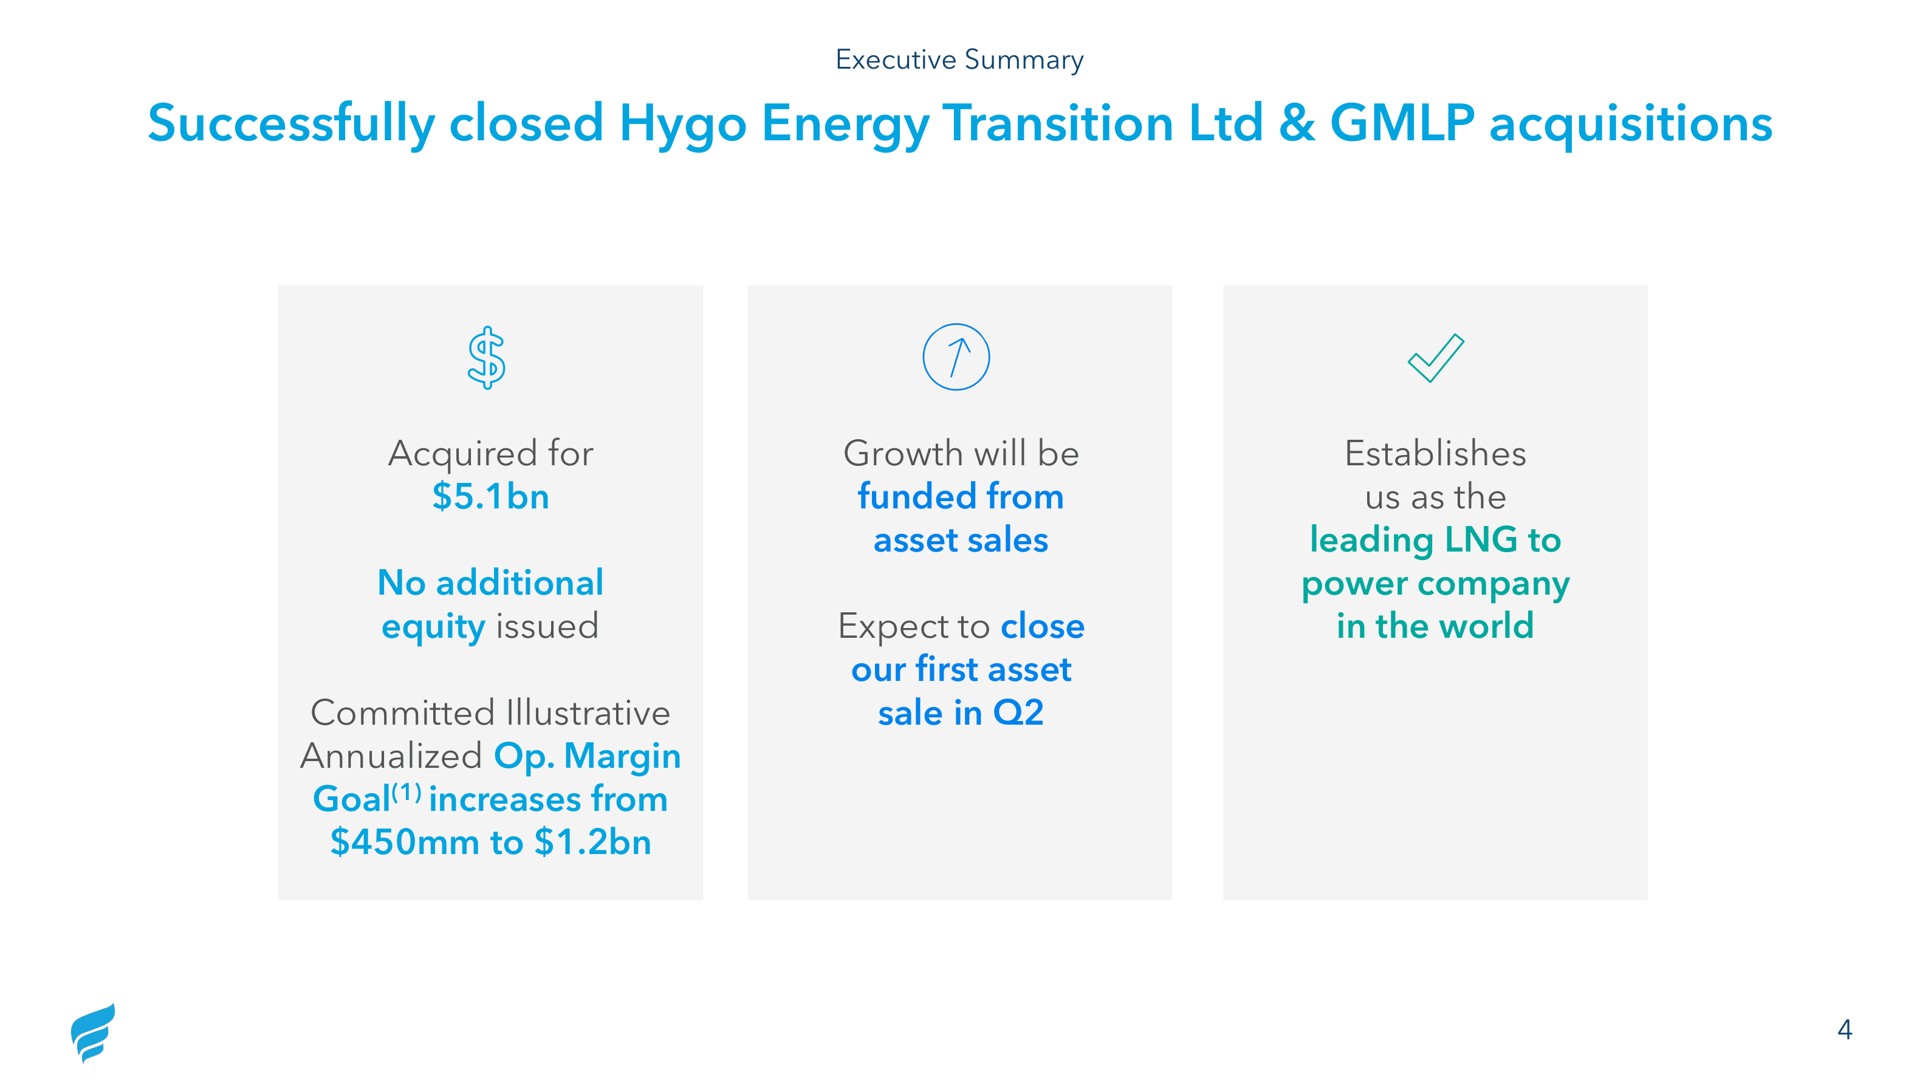 successfully closed energy transition acquisitions | NewFortress Energy